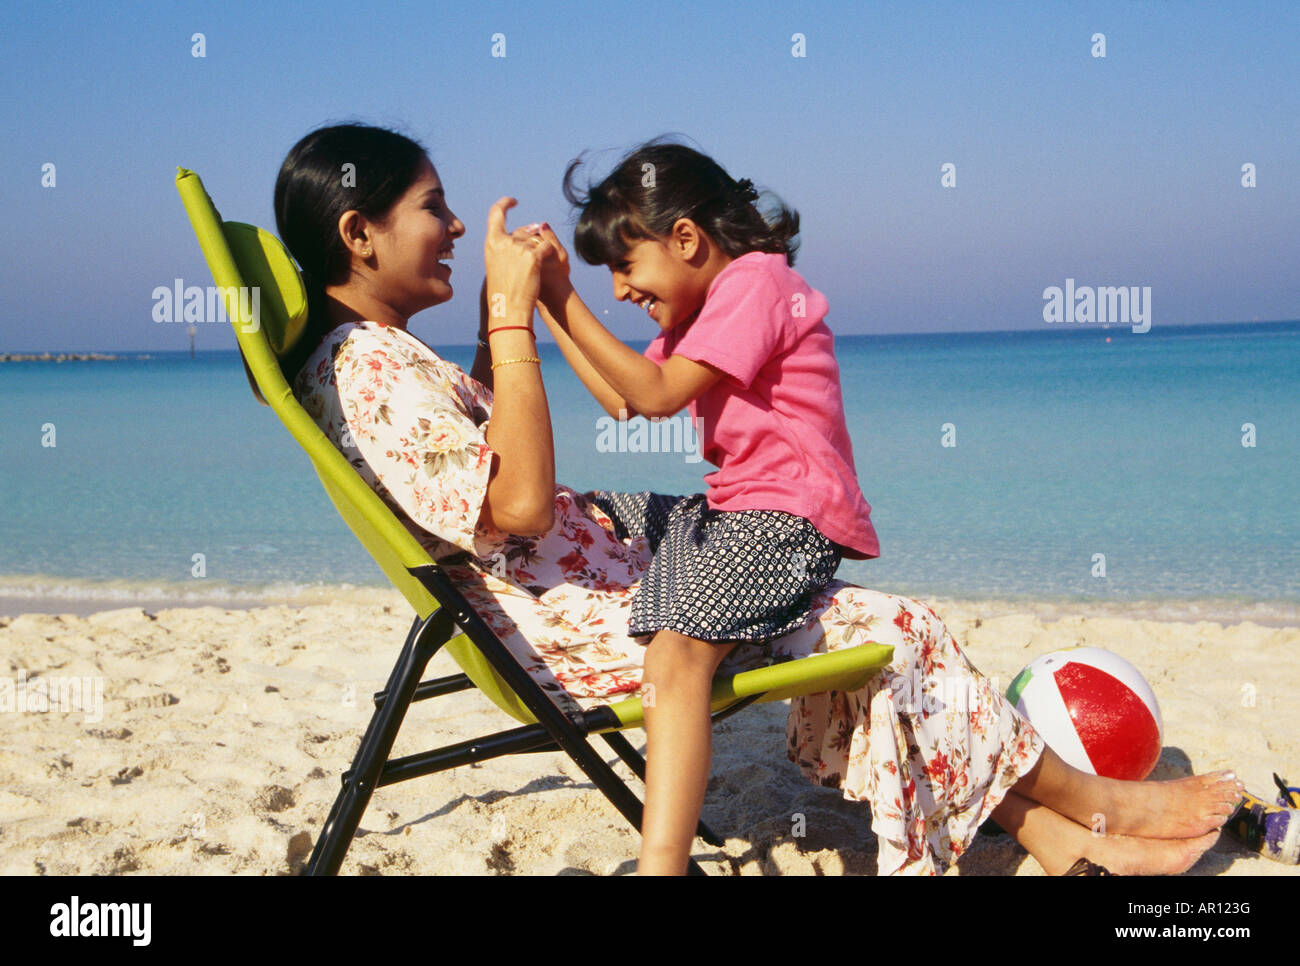 A mother and daughter cherishing happy moments on the beach. Stock Photo